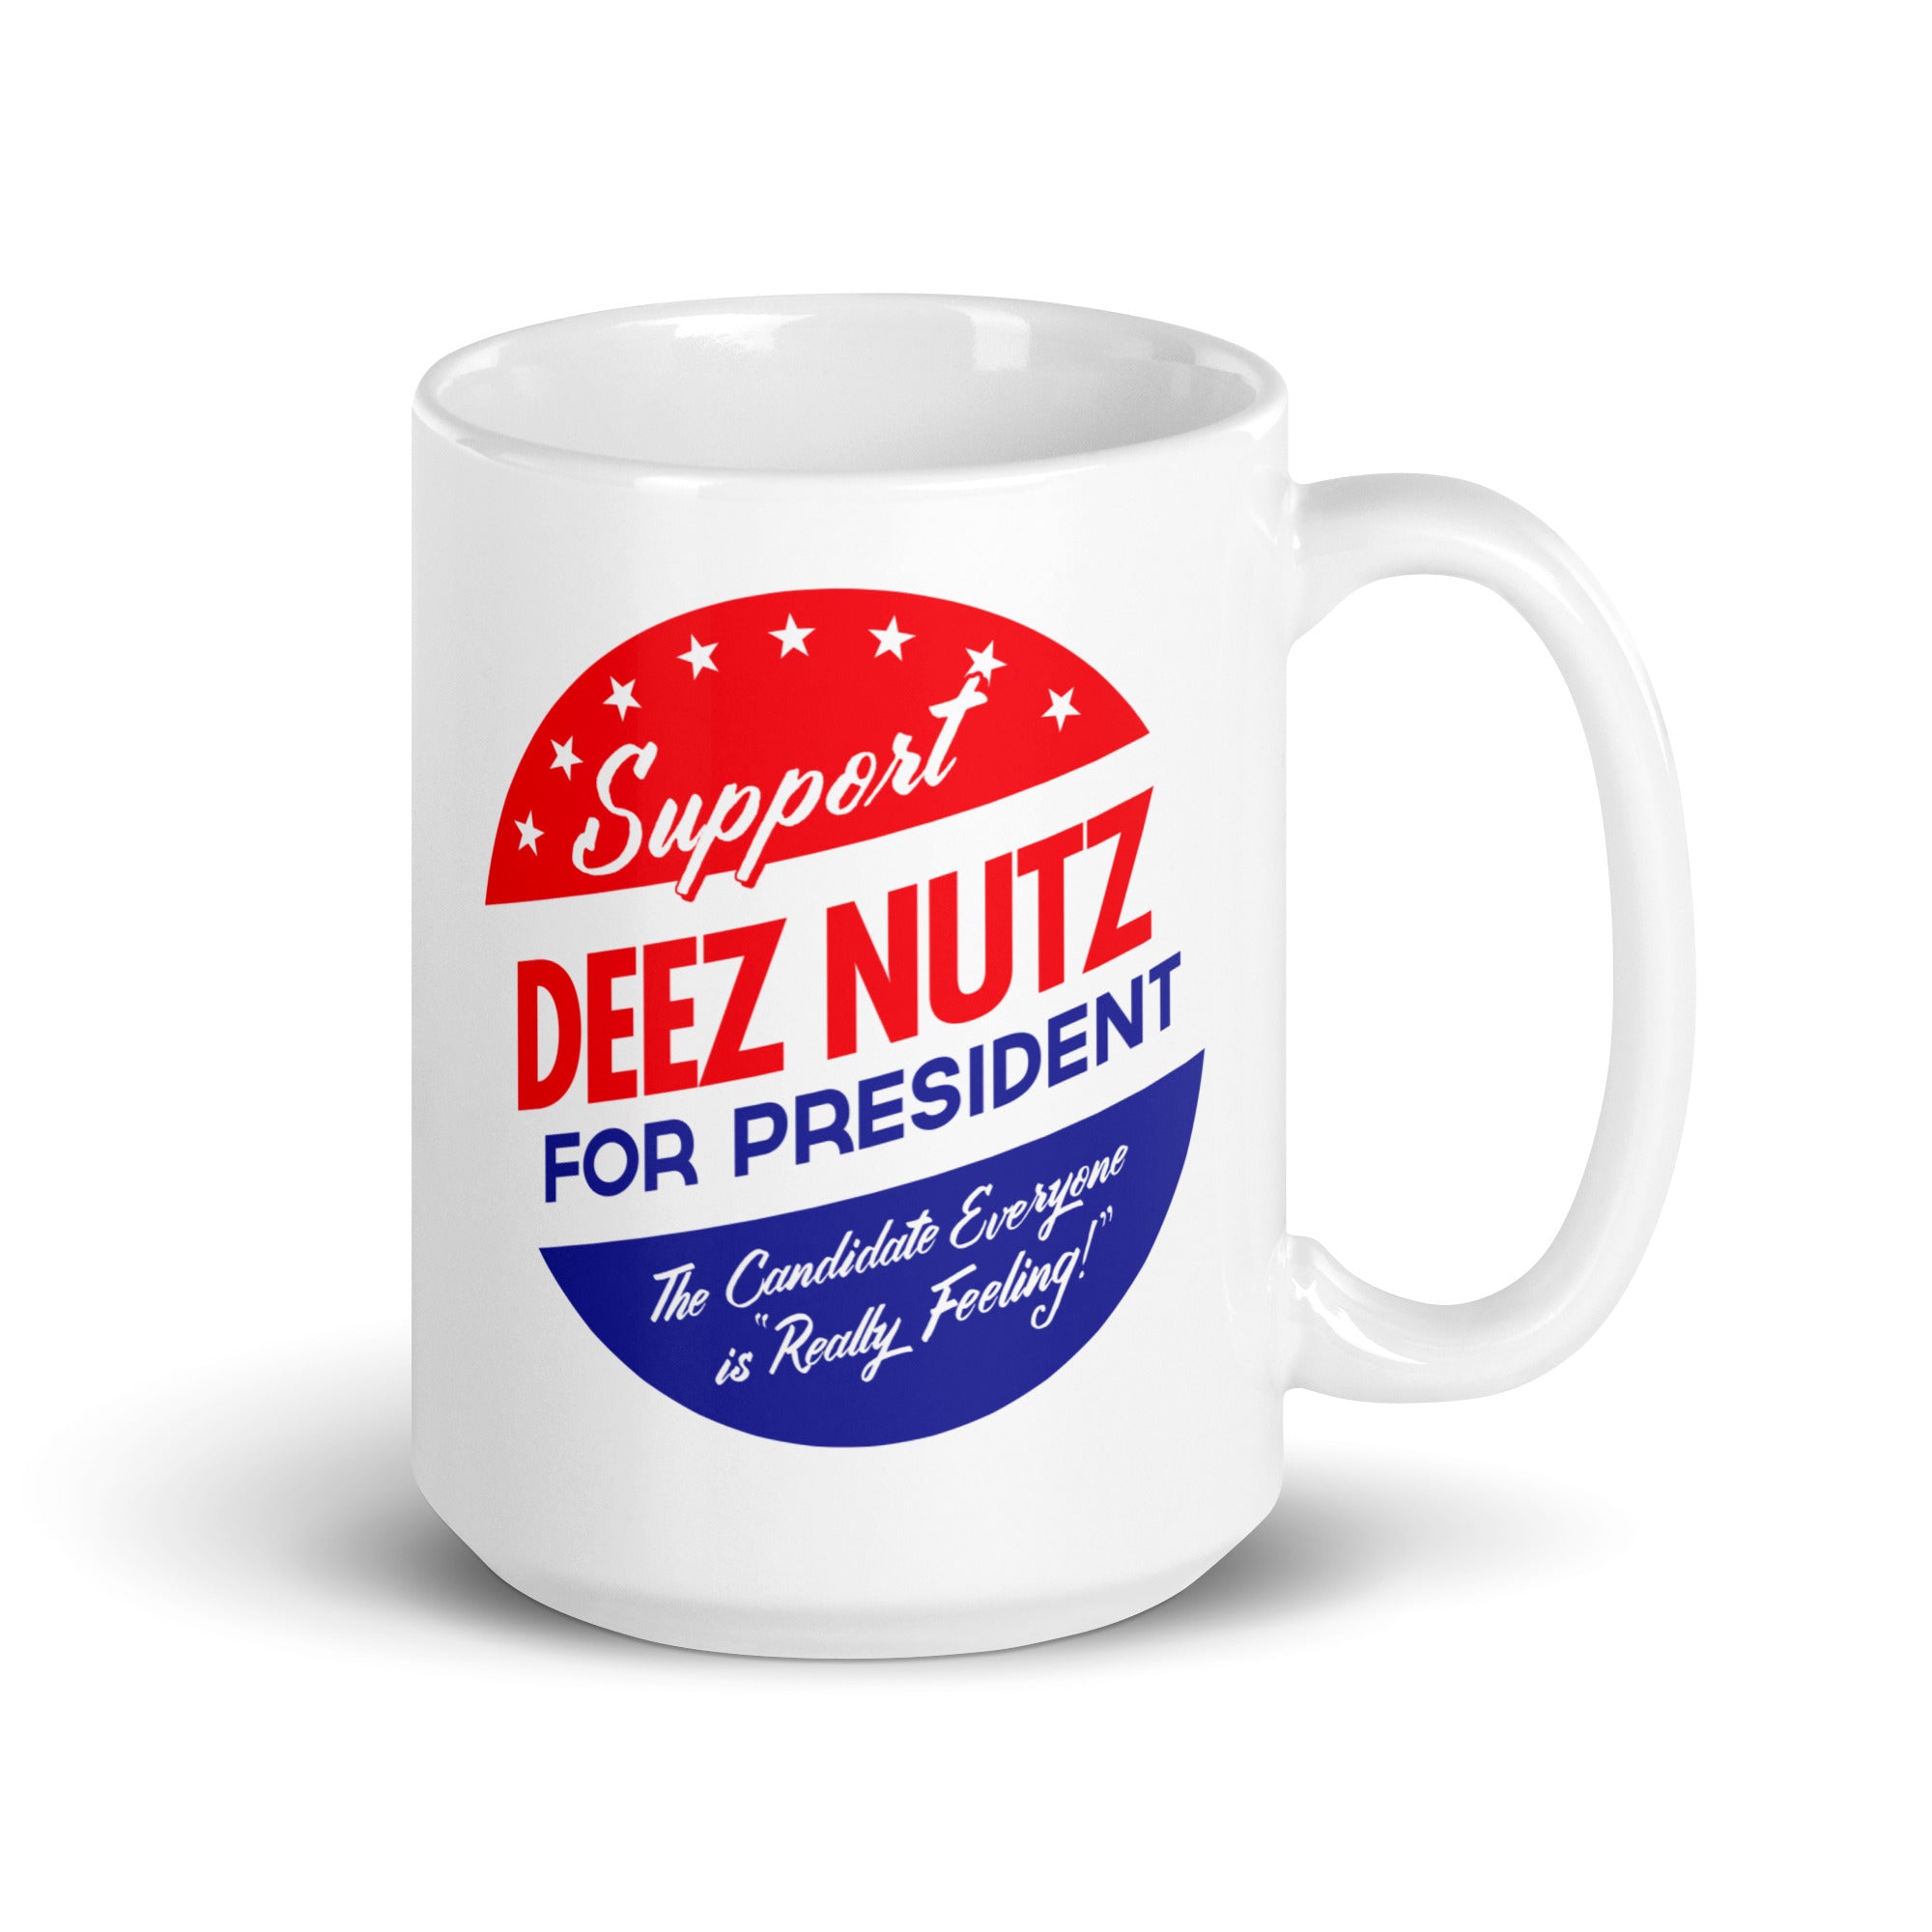 Deez Nuts for President Coffee Mugs